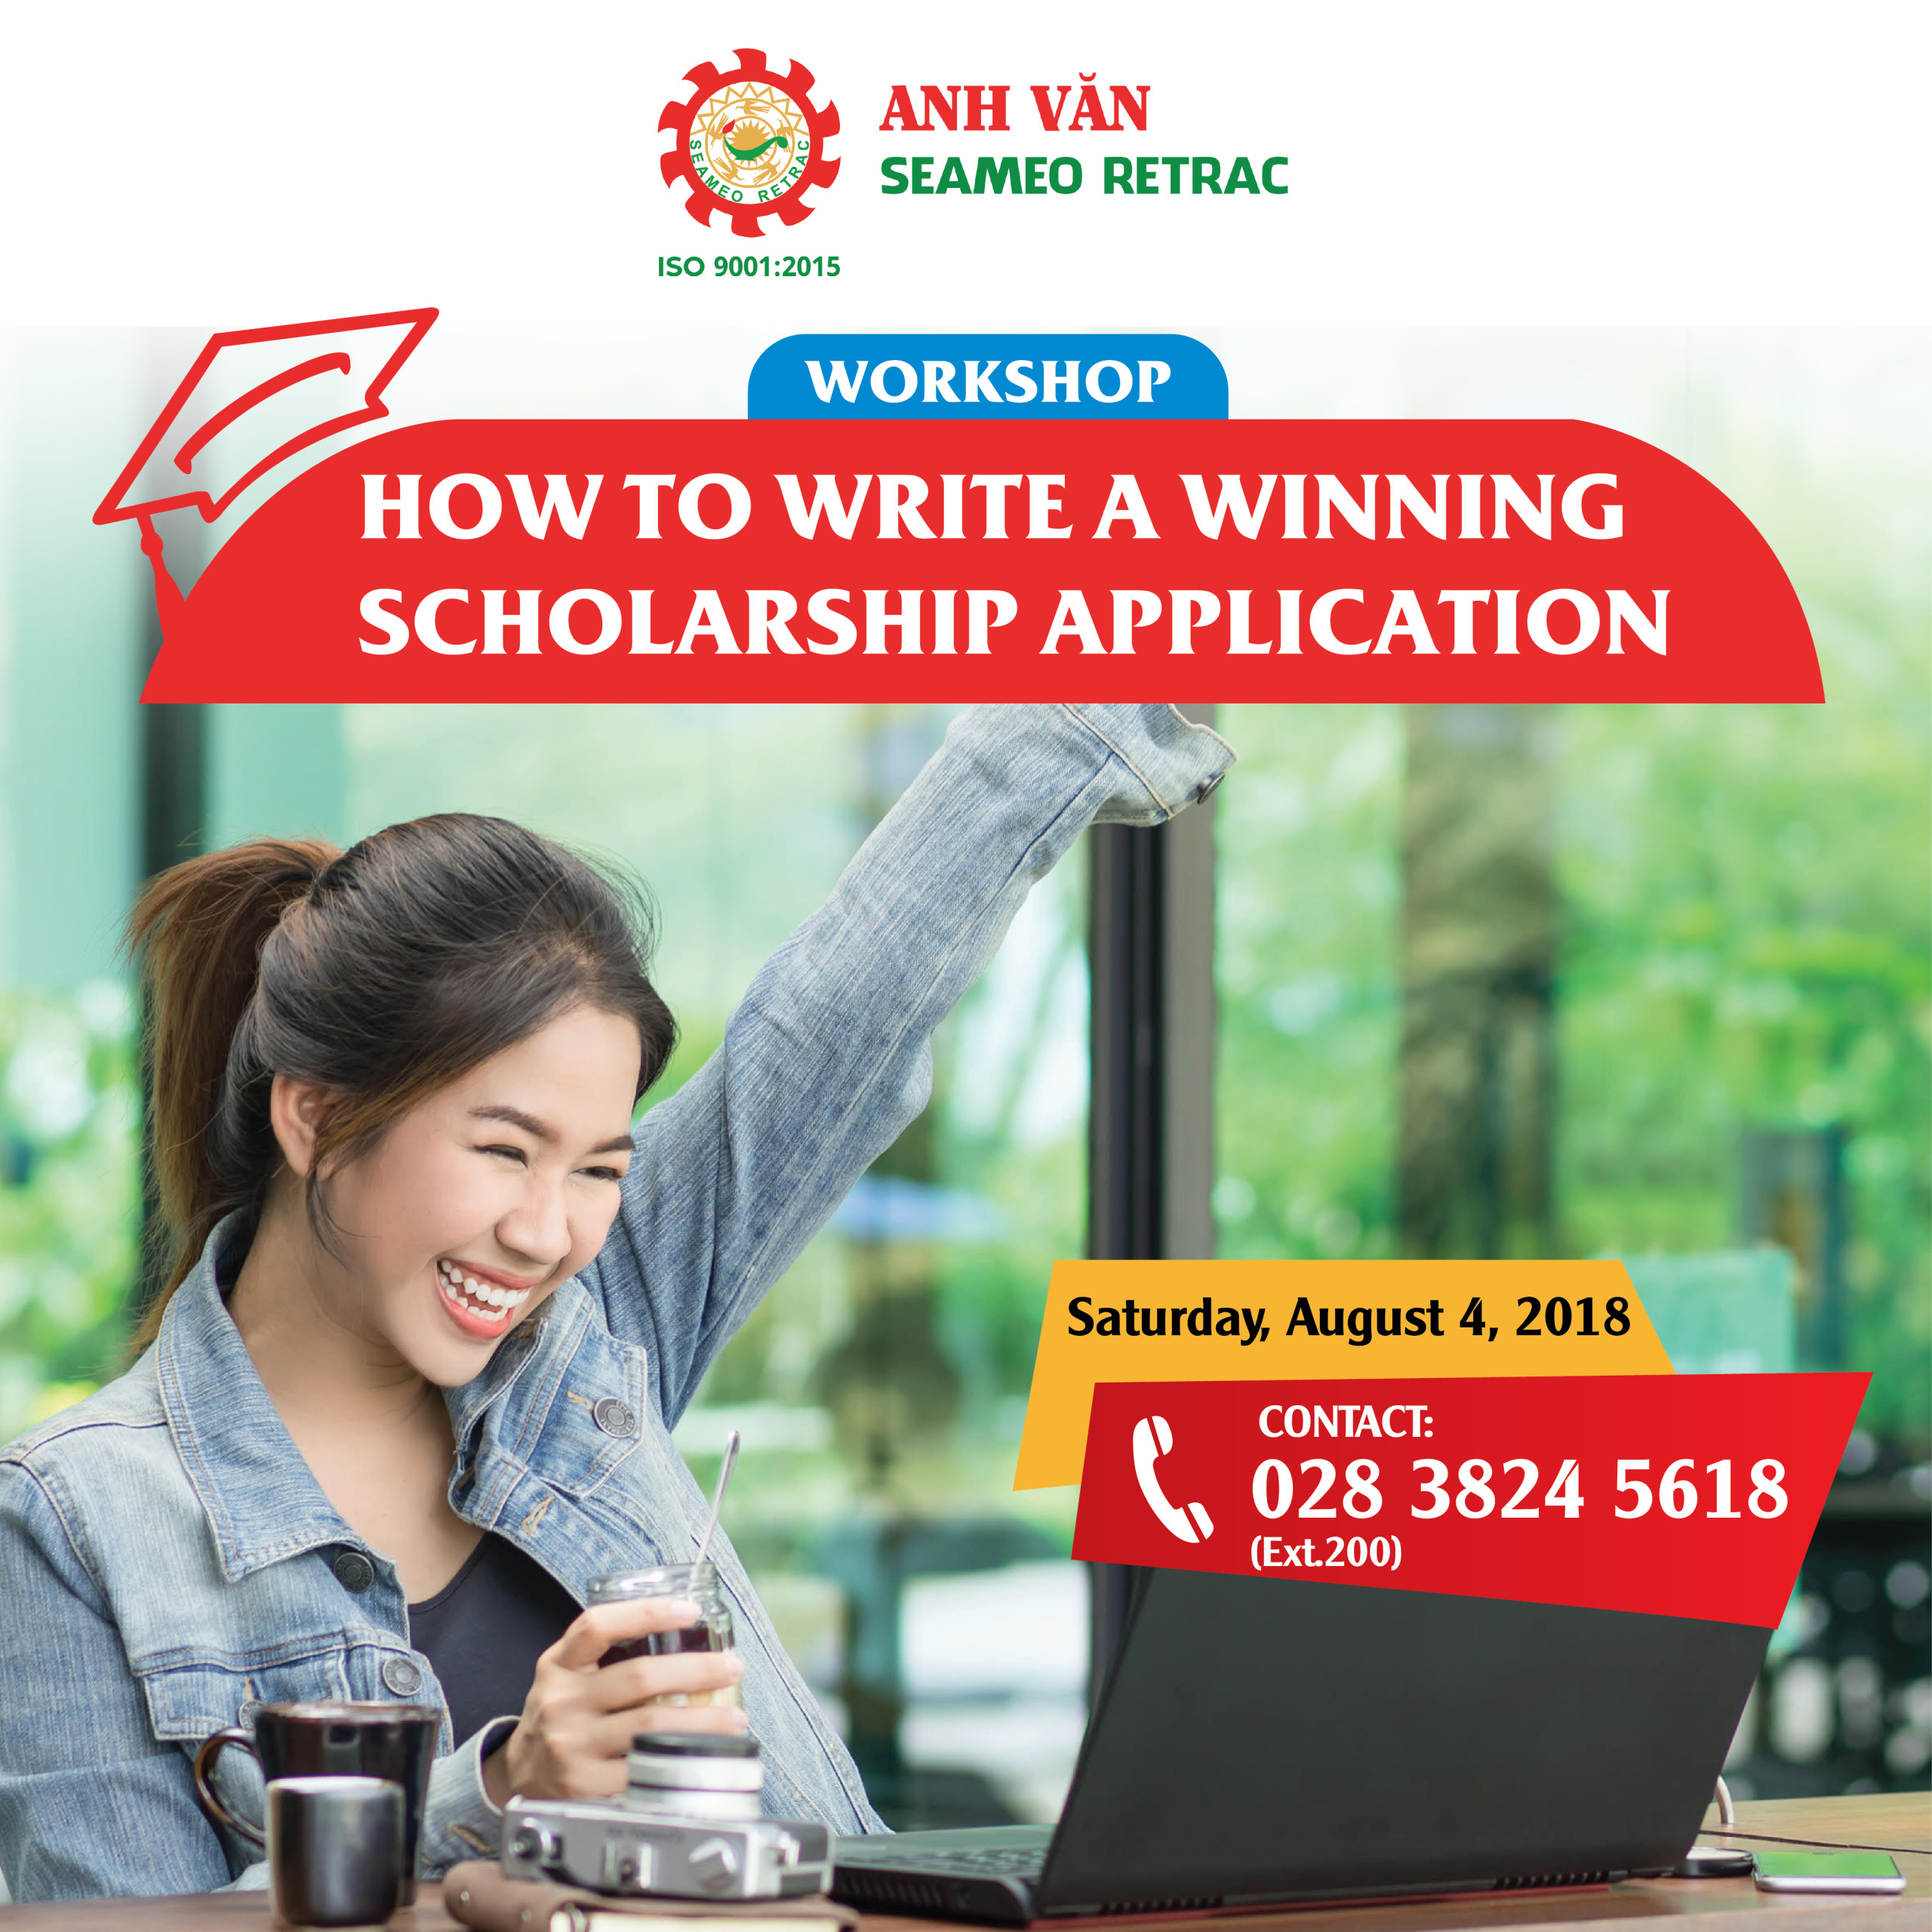 Workshop HOW TO WRITE A WINNING SCHOLARSHIP APPLICATION